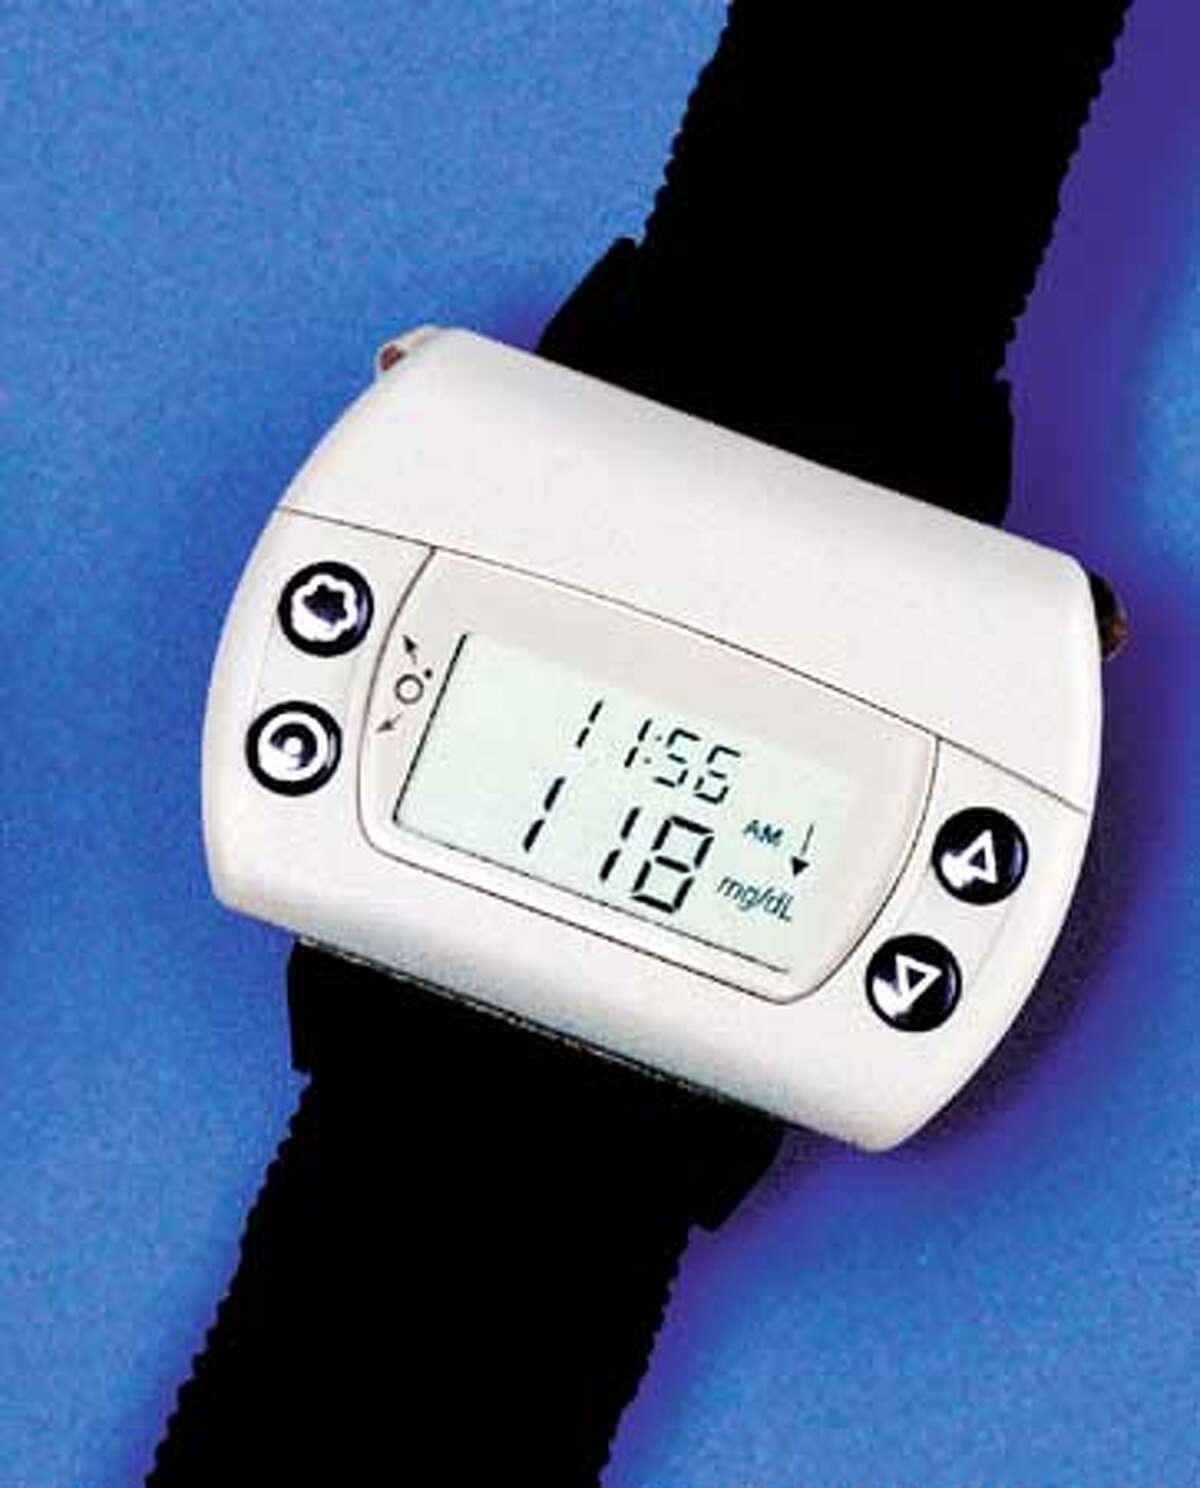 pain-free-blood-sugar-monitoring-device-for-diabetics-worn-on-user-s